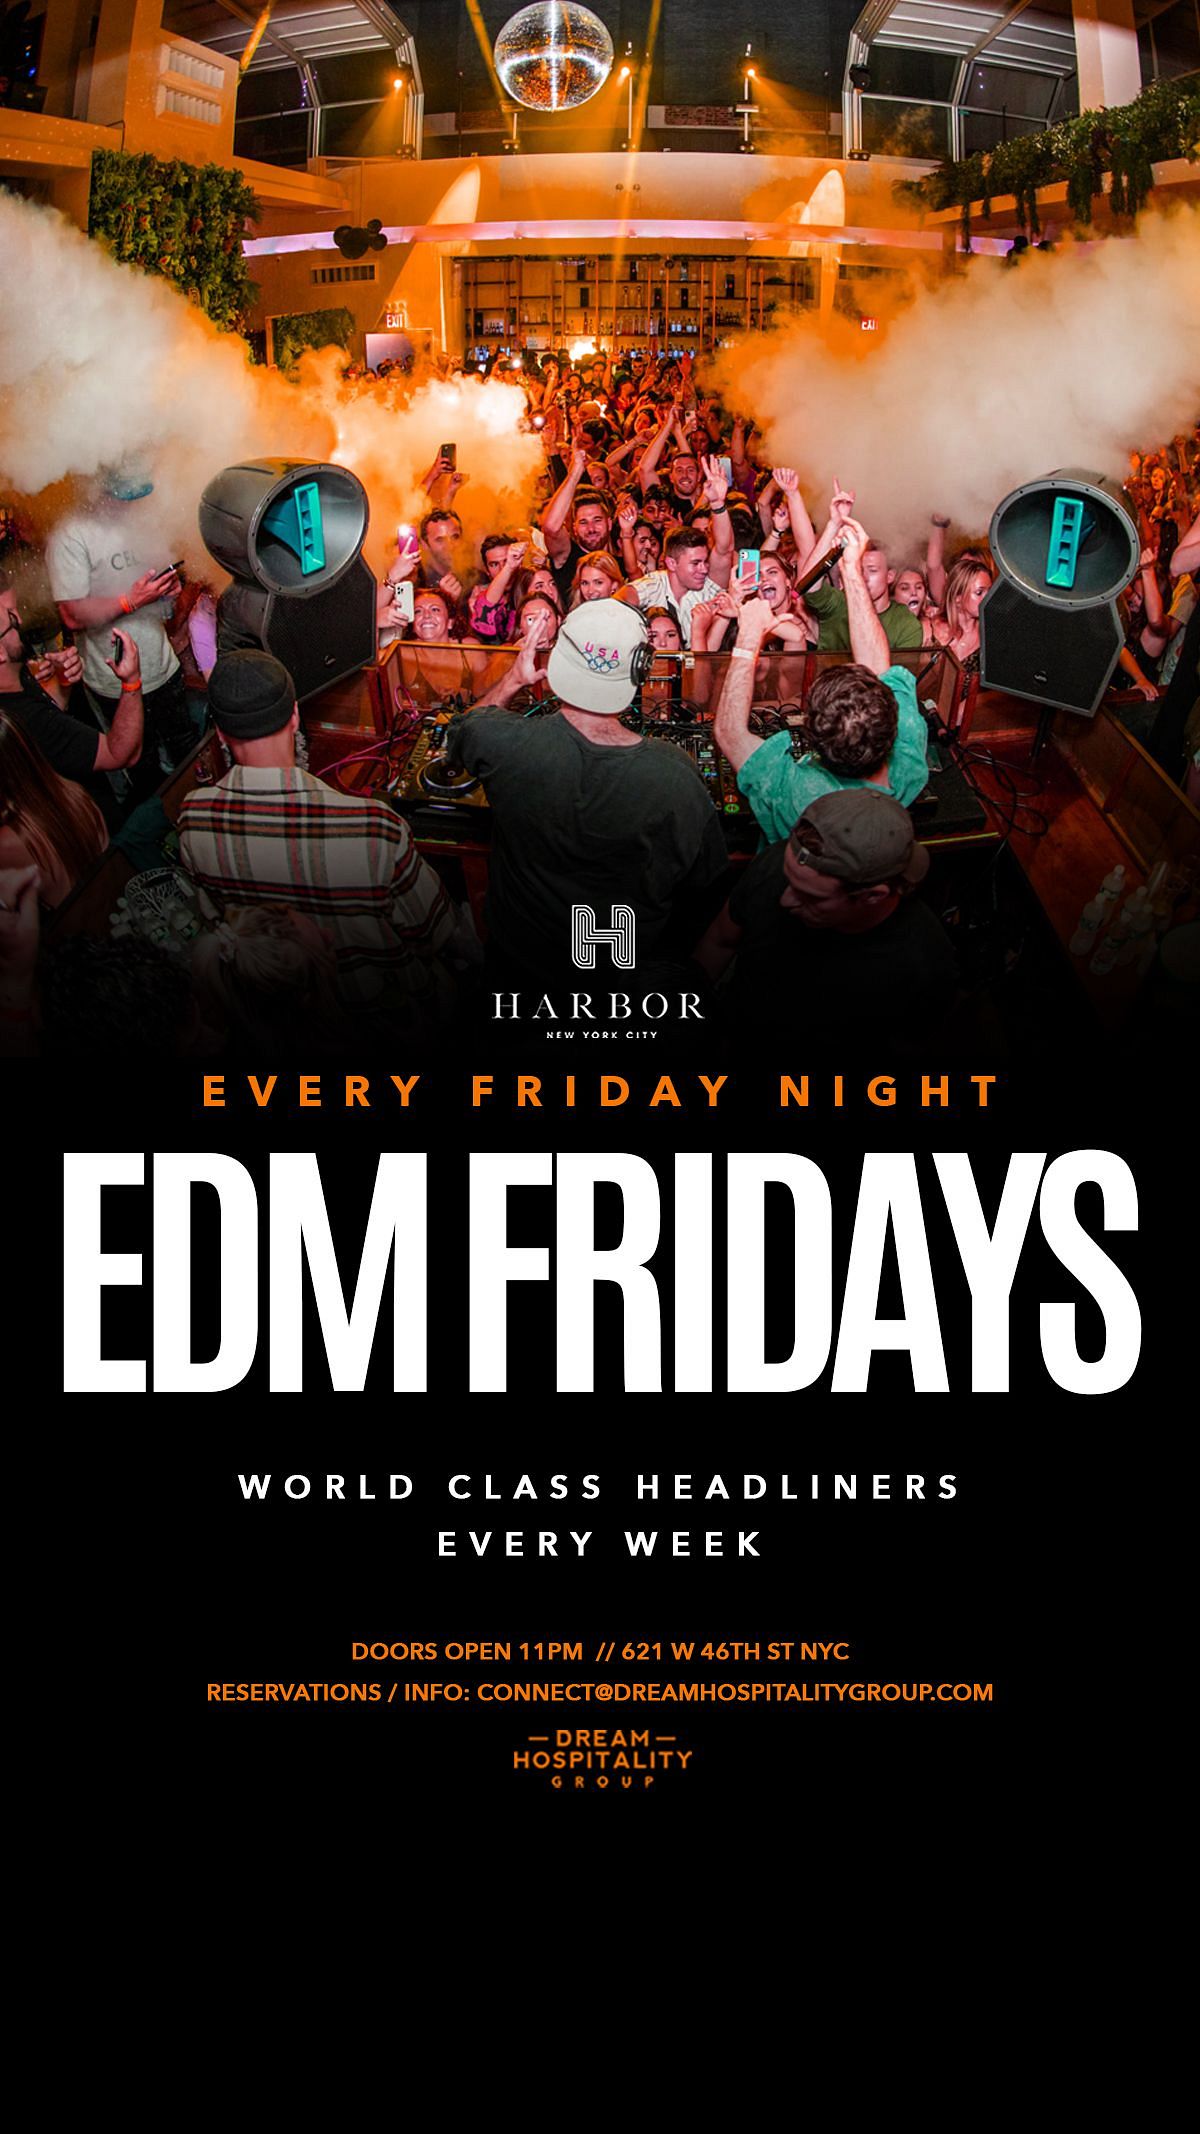 EDM FRIDAYS HARBOR NYC Tickets at Harbor New York City in New York by